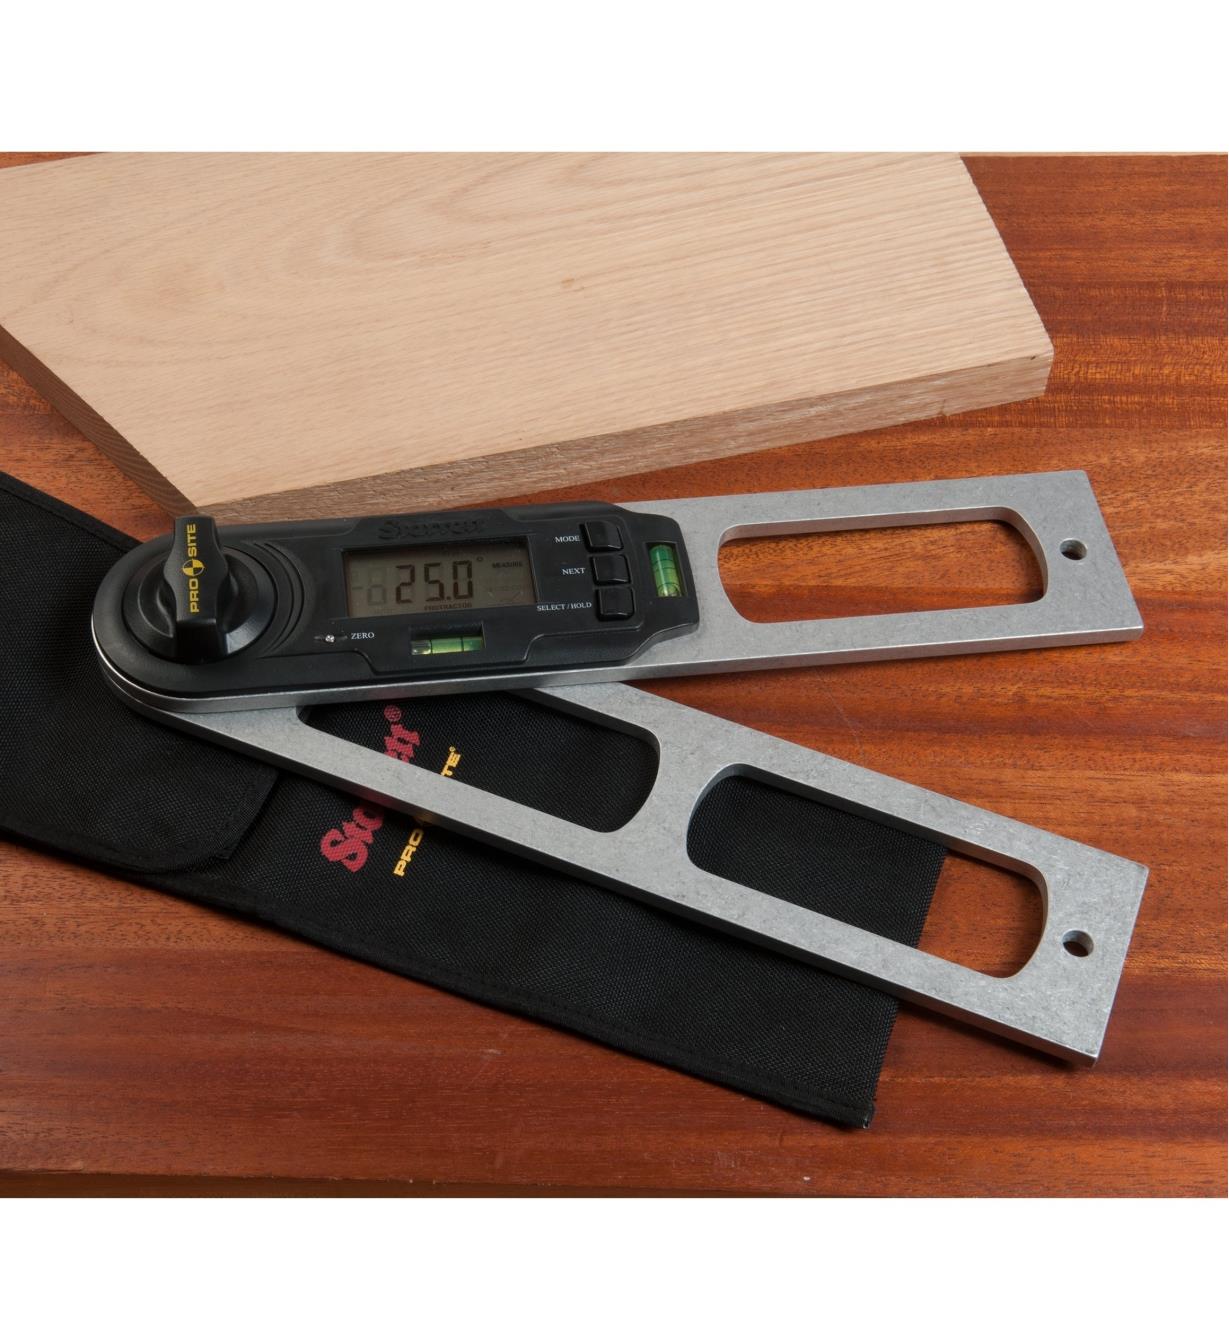 Starrett Digital Protractor lying on a table next to a piece of wood